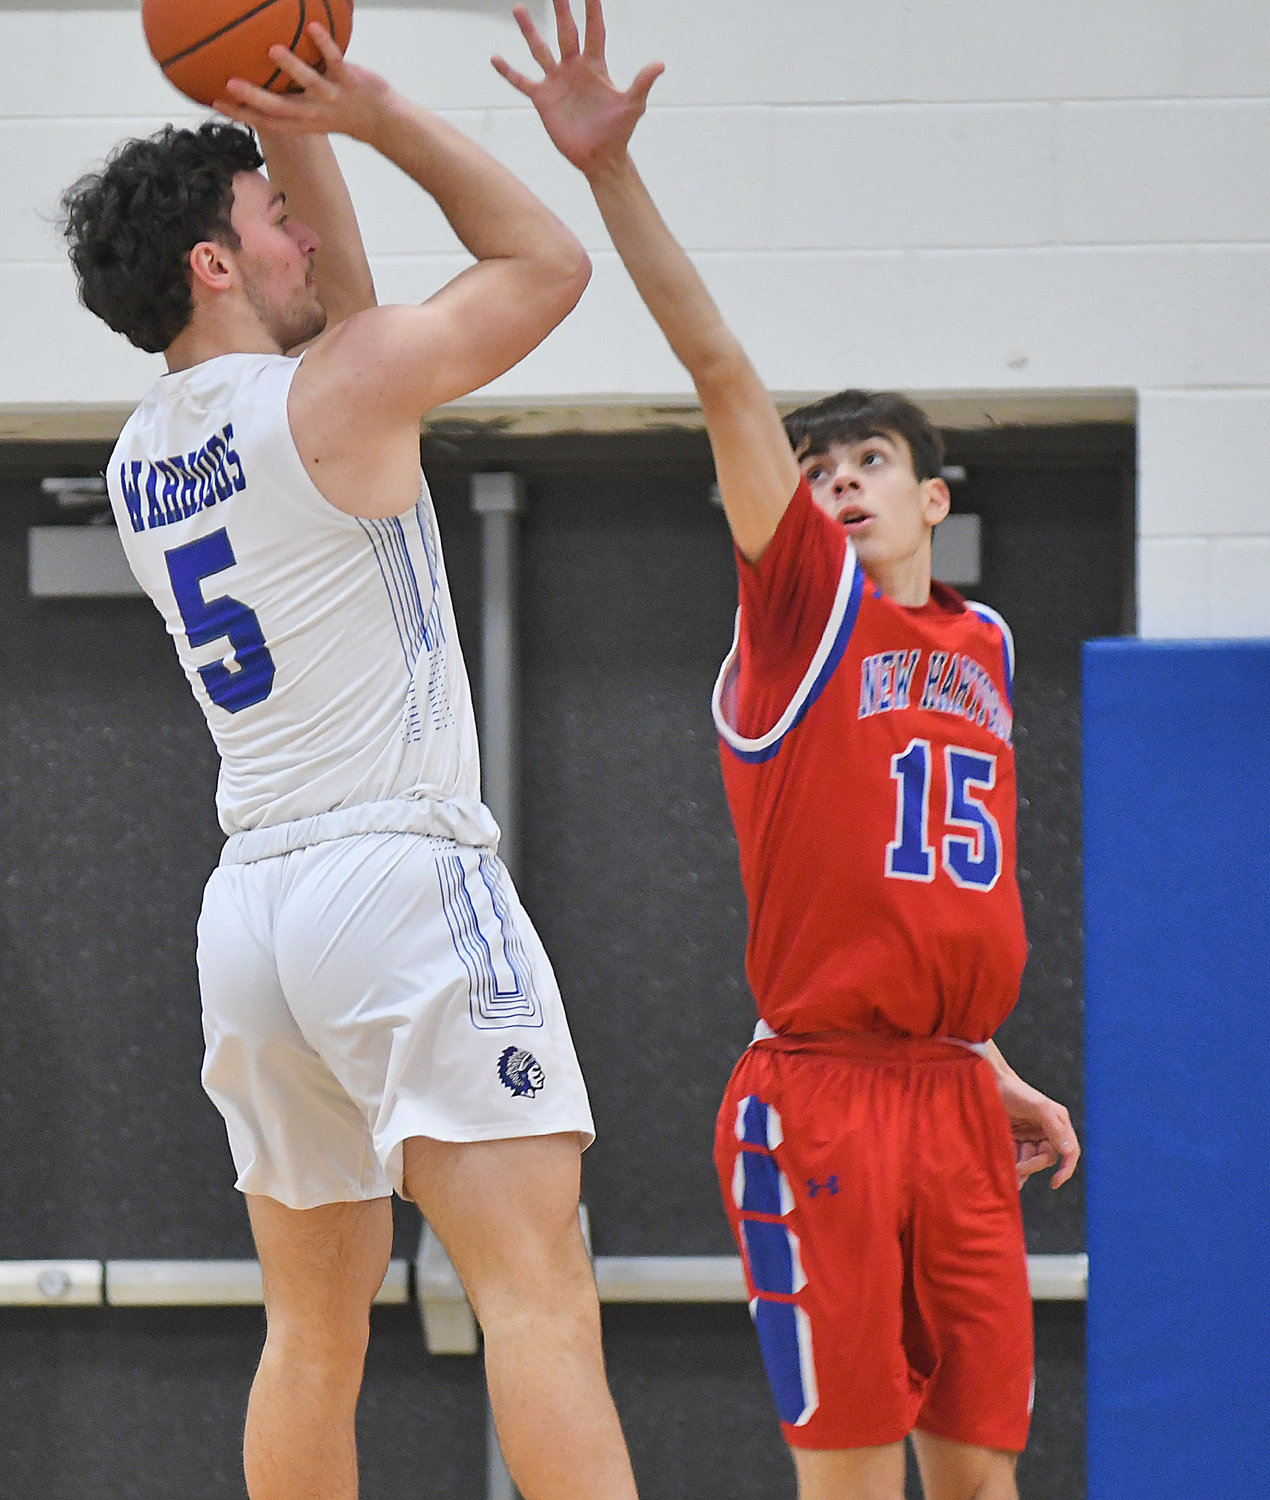 Kyle Meier of Whitesboro takes a shot with New Hartford defender Jameson Stockwell getting a hand out Monday night at Whitesboro High School. Meier led his team with 11 points and Stockwell led his with 19. New Hartford won 50-27.